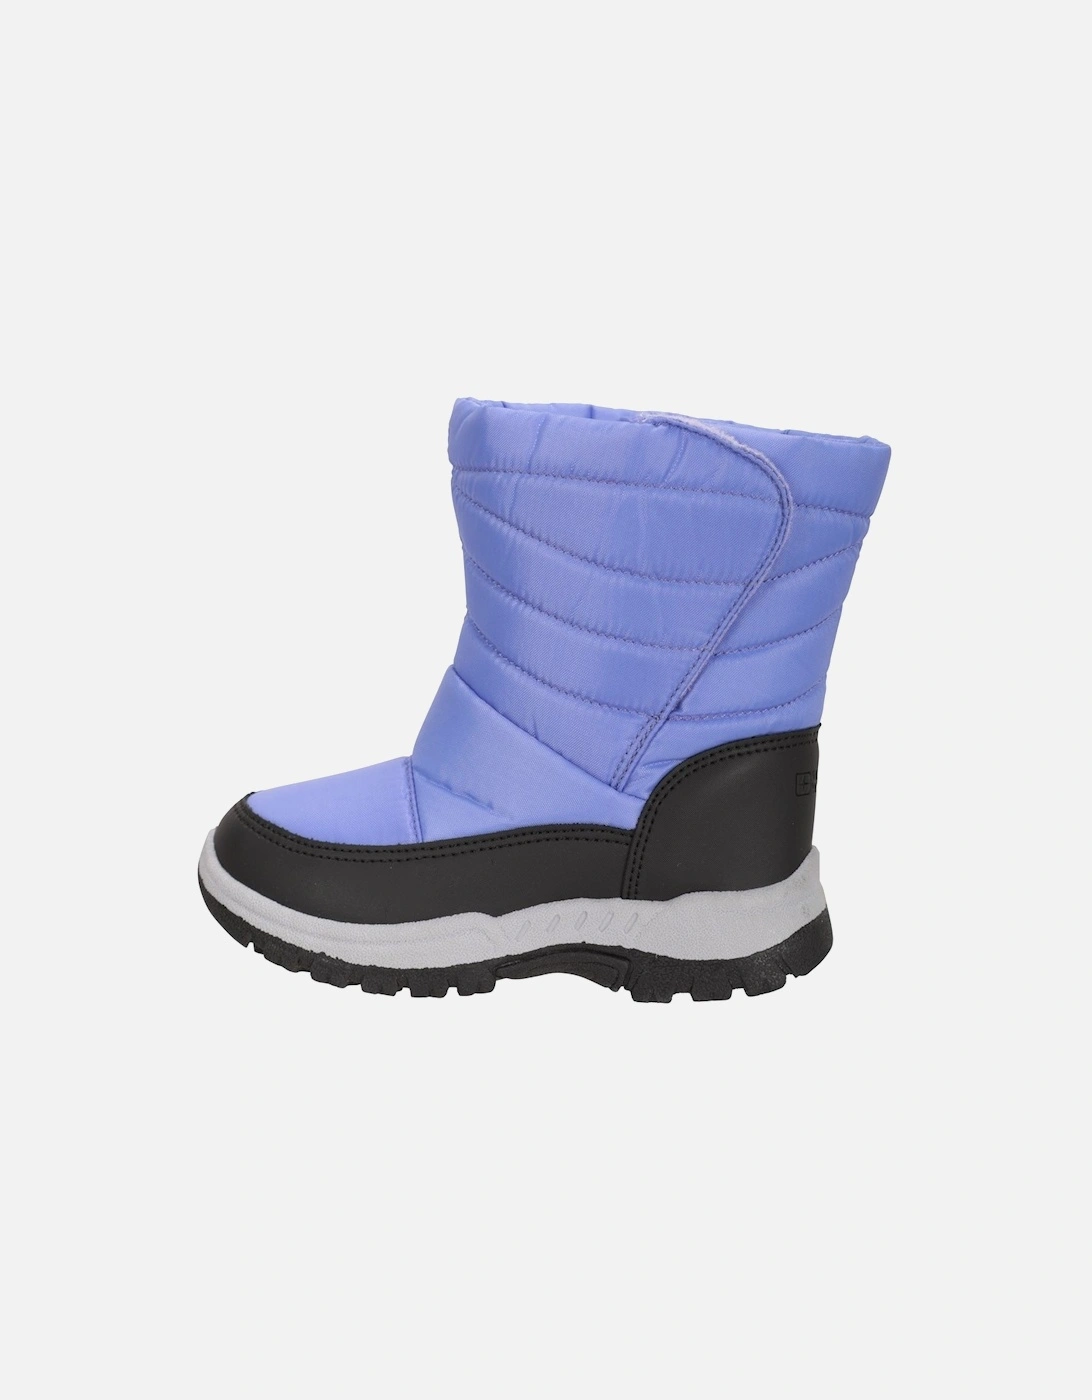 Childrens/Kids Caribou Adaptive Snow Boots